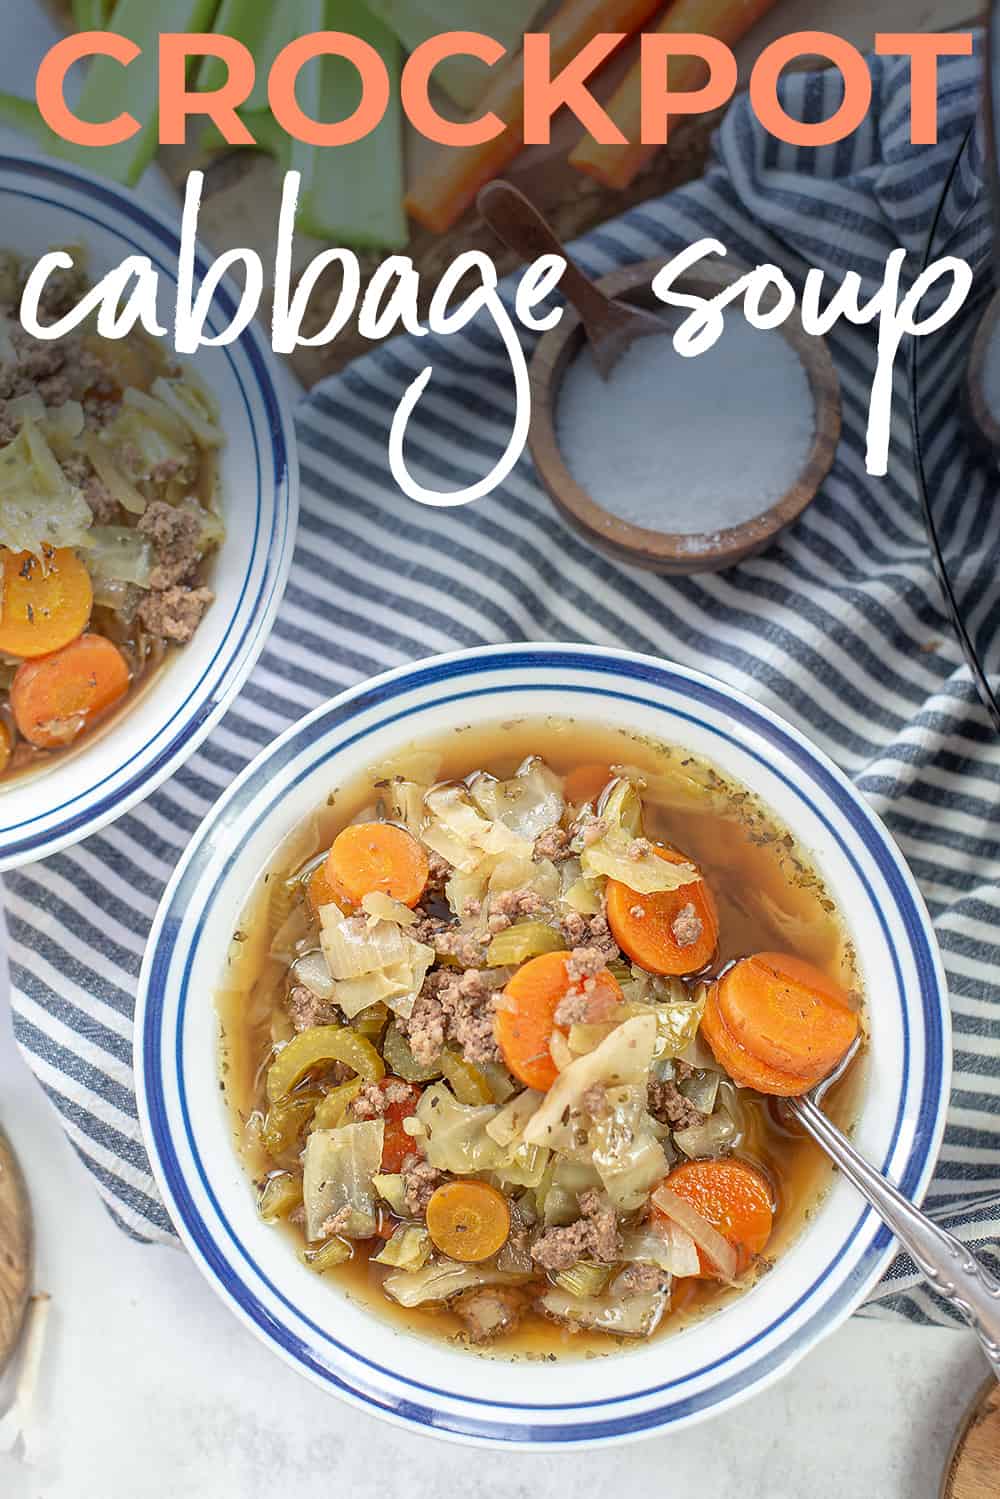 bowl of cabbage soup with text for Pinterest.